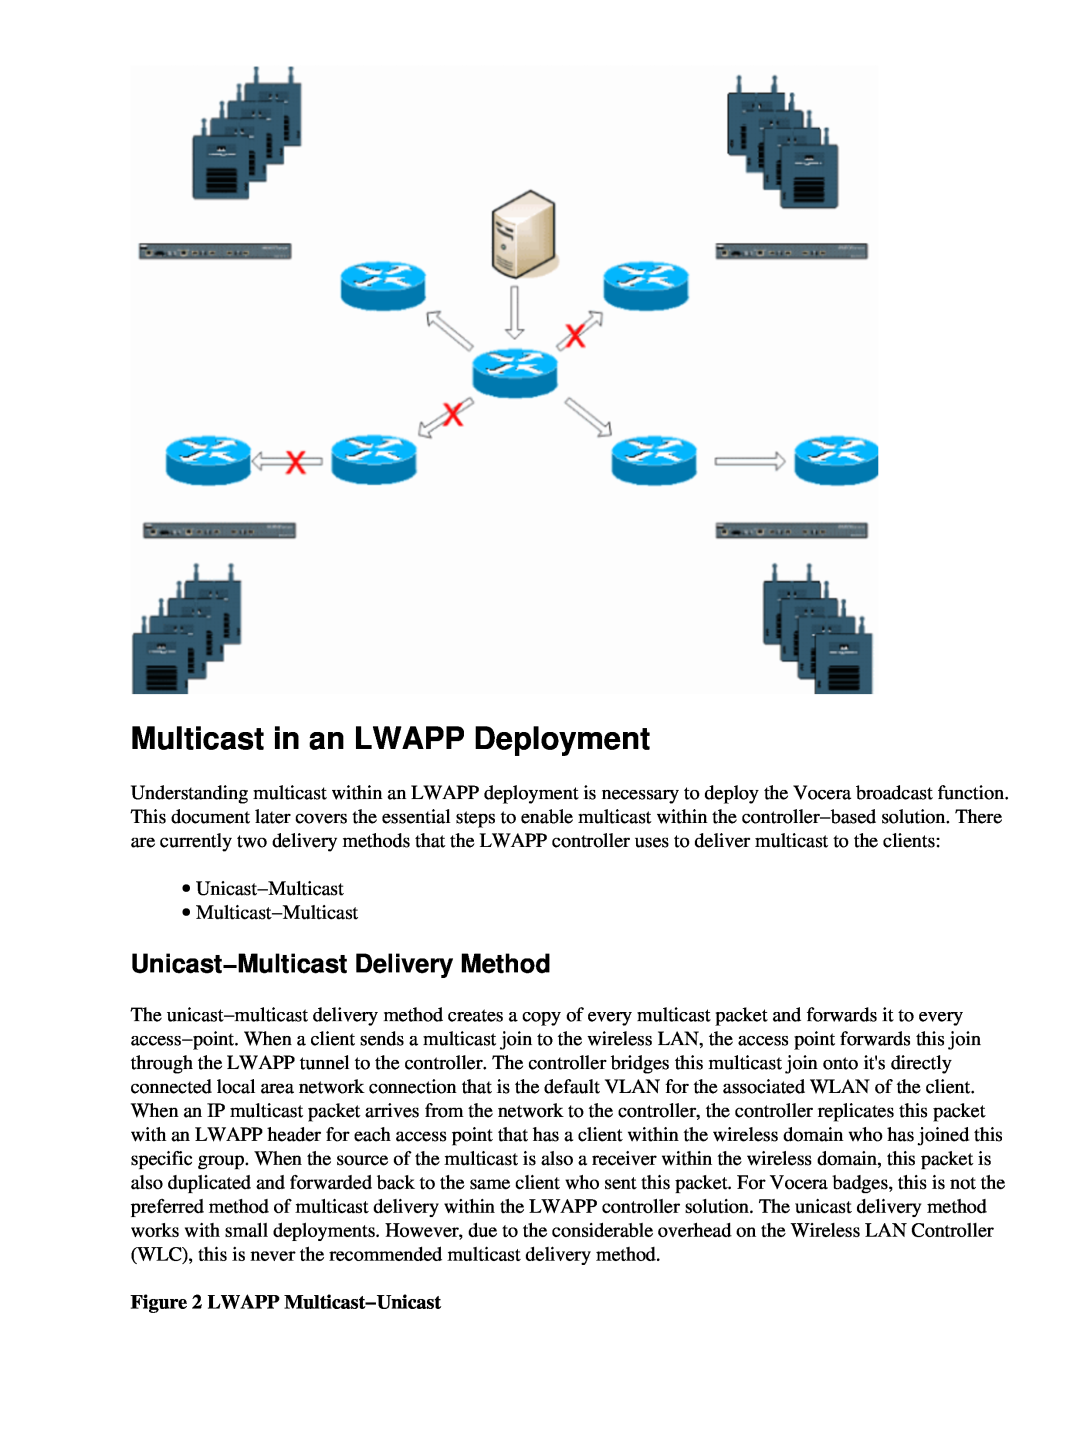 Cisco Systems 71642 manual Multicast in an LWAPP Deployment, Unicast−Multicast Delivery Method, LWAPP Multicast−Unicast 